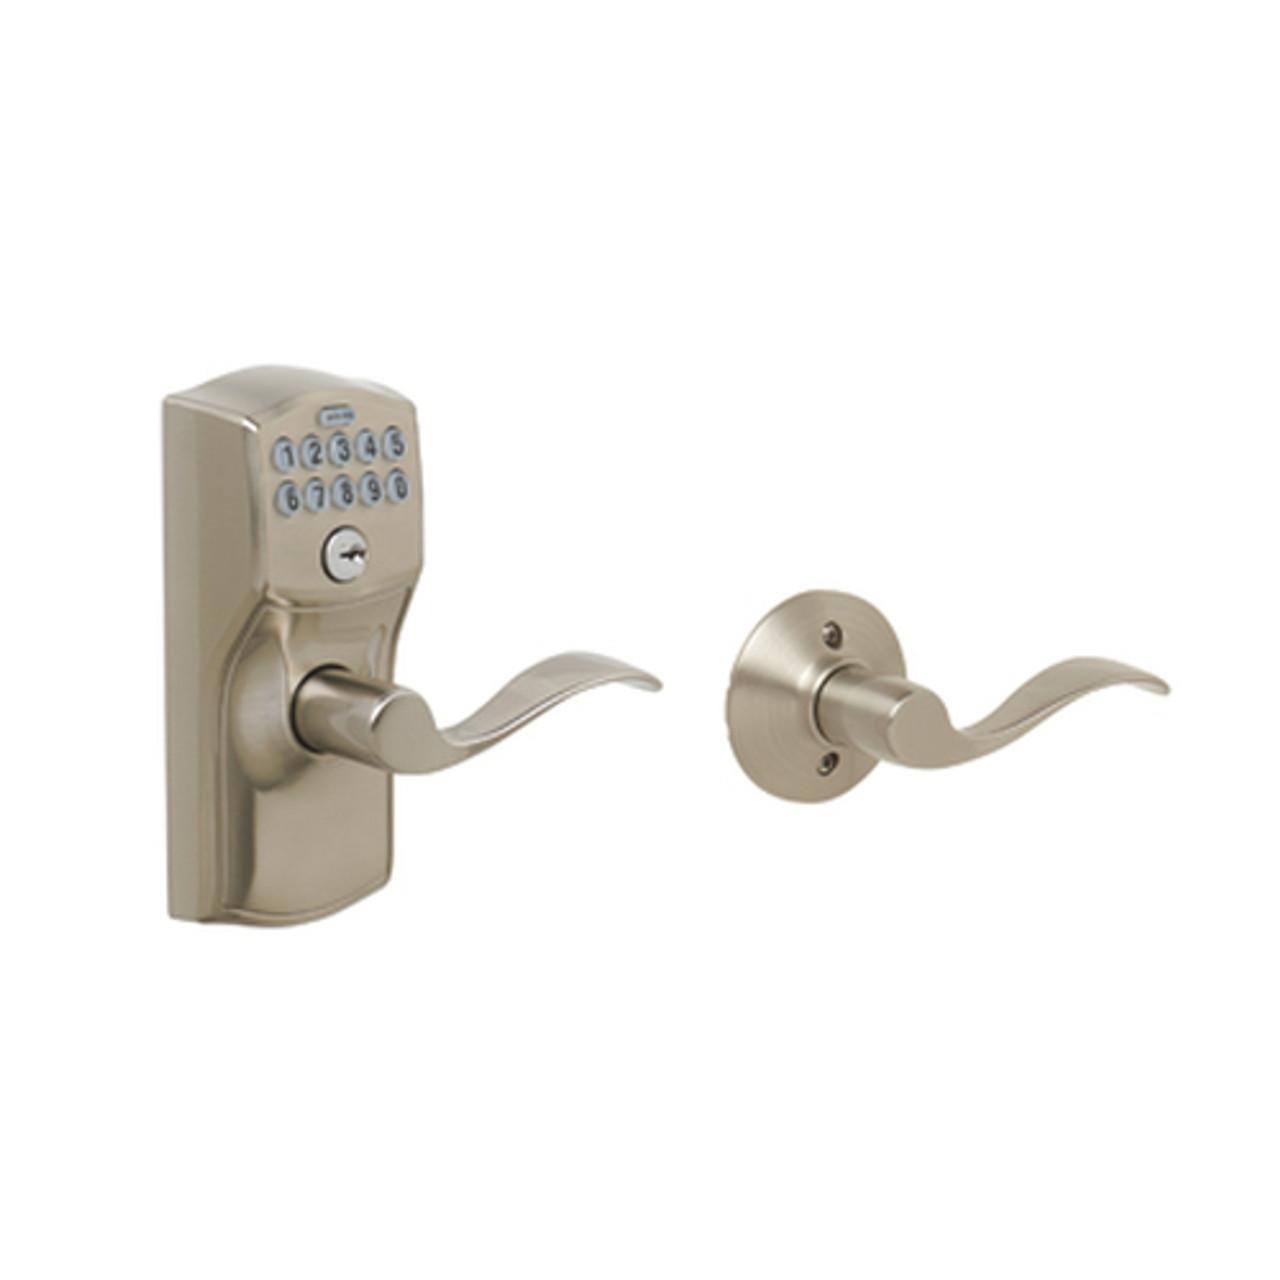 SCHLAGE Satin Nickel FE595VCAM619ACC Camelot Keypad Entry with Flex-Lock  and Accent Levers